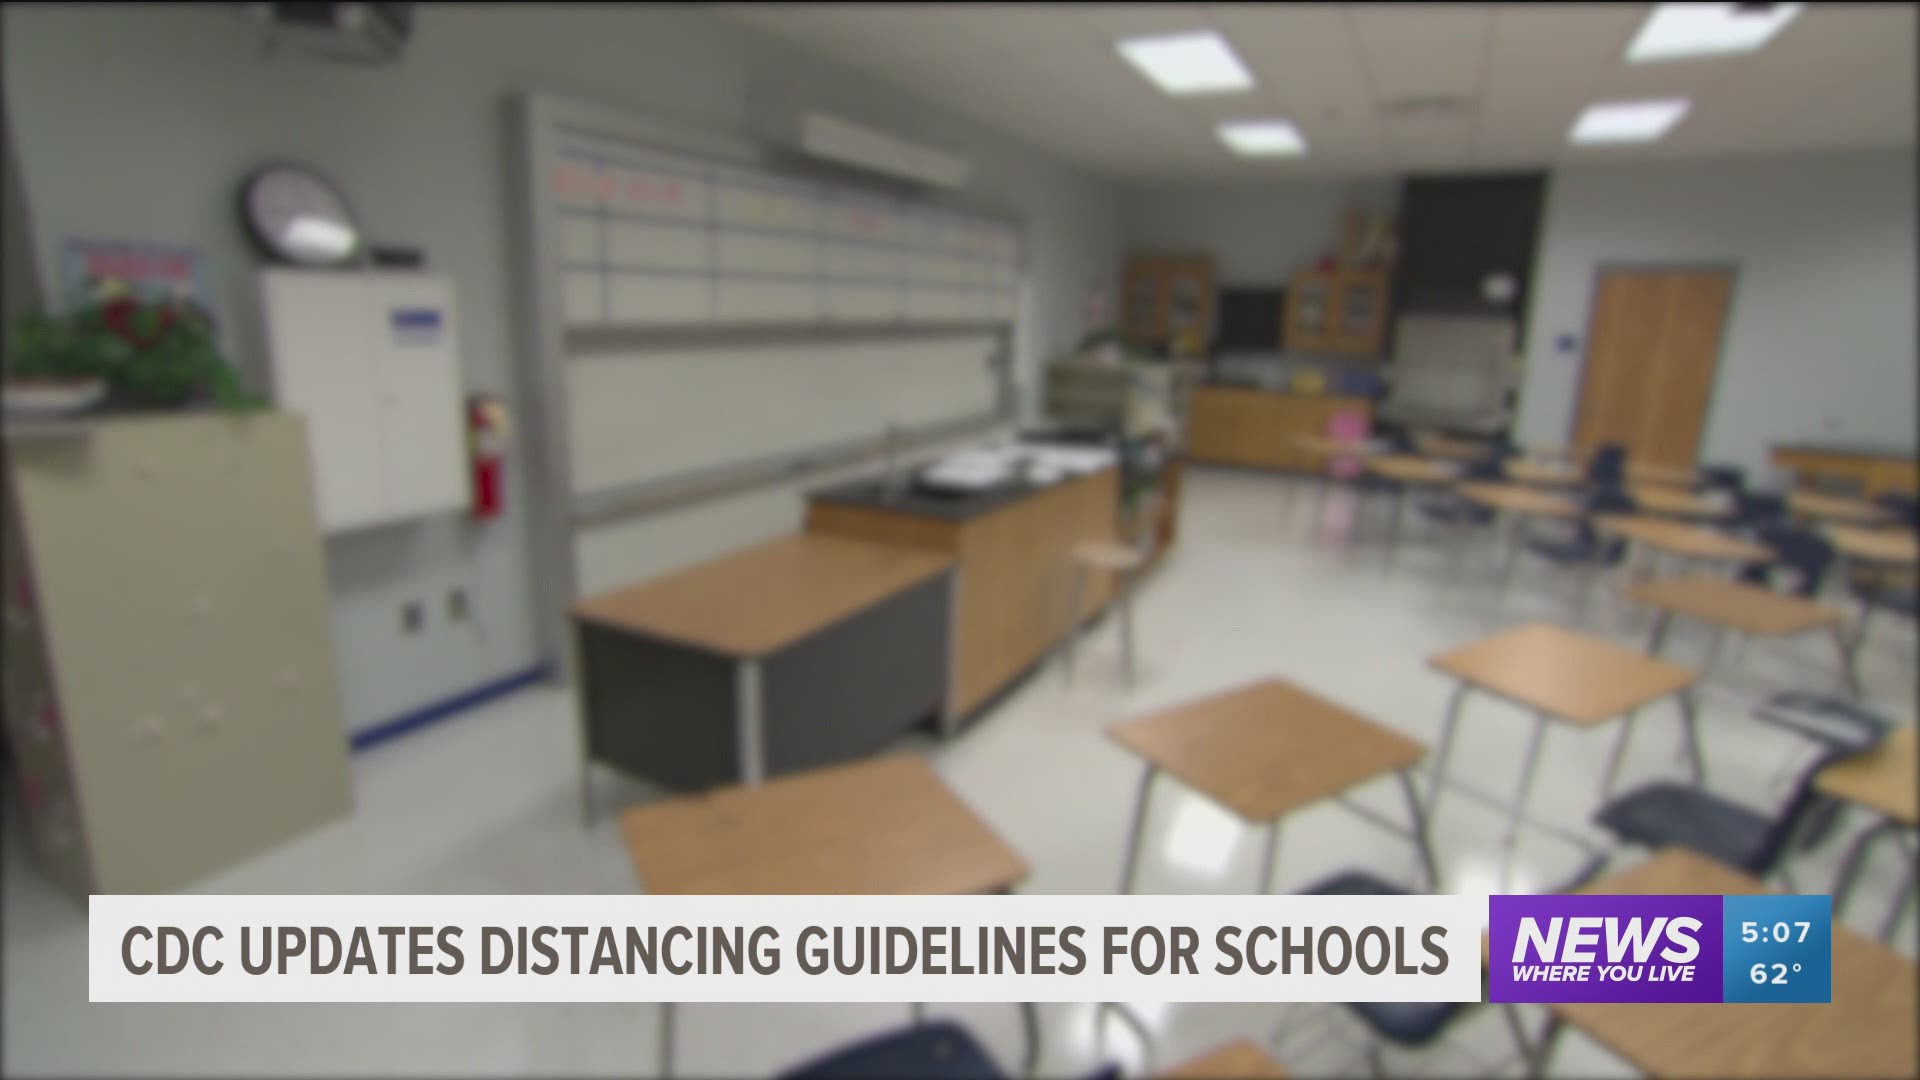 In recent months, schools in some states have been disregarding the CDC guidelines, using 3 feet as their standard.